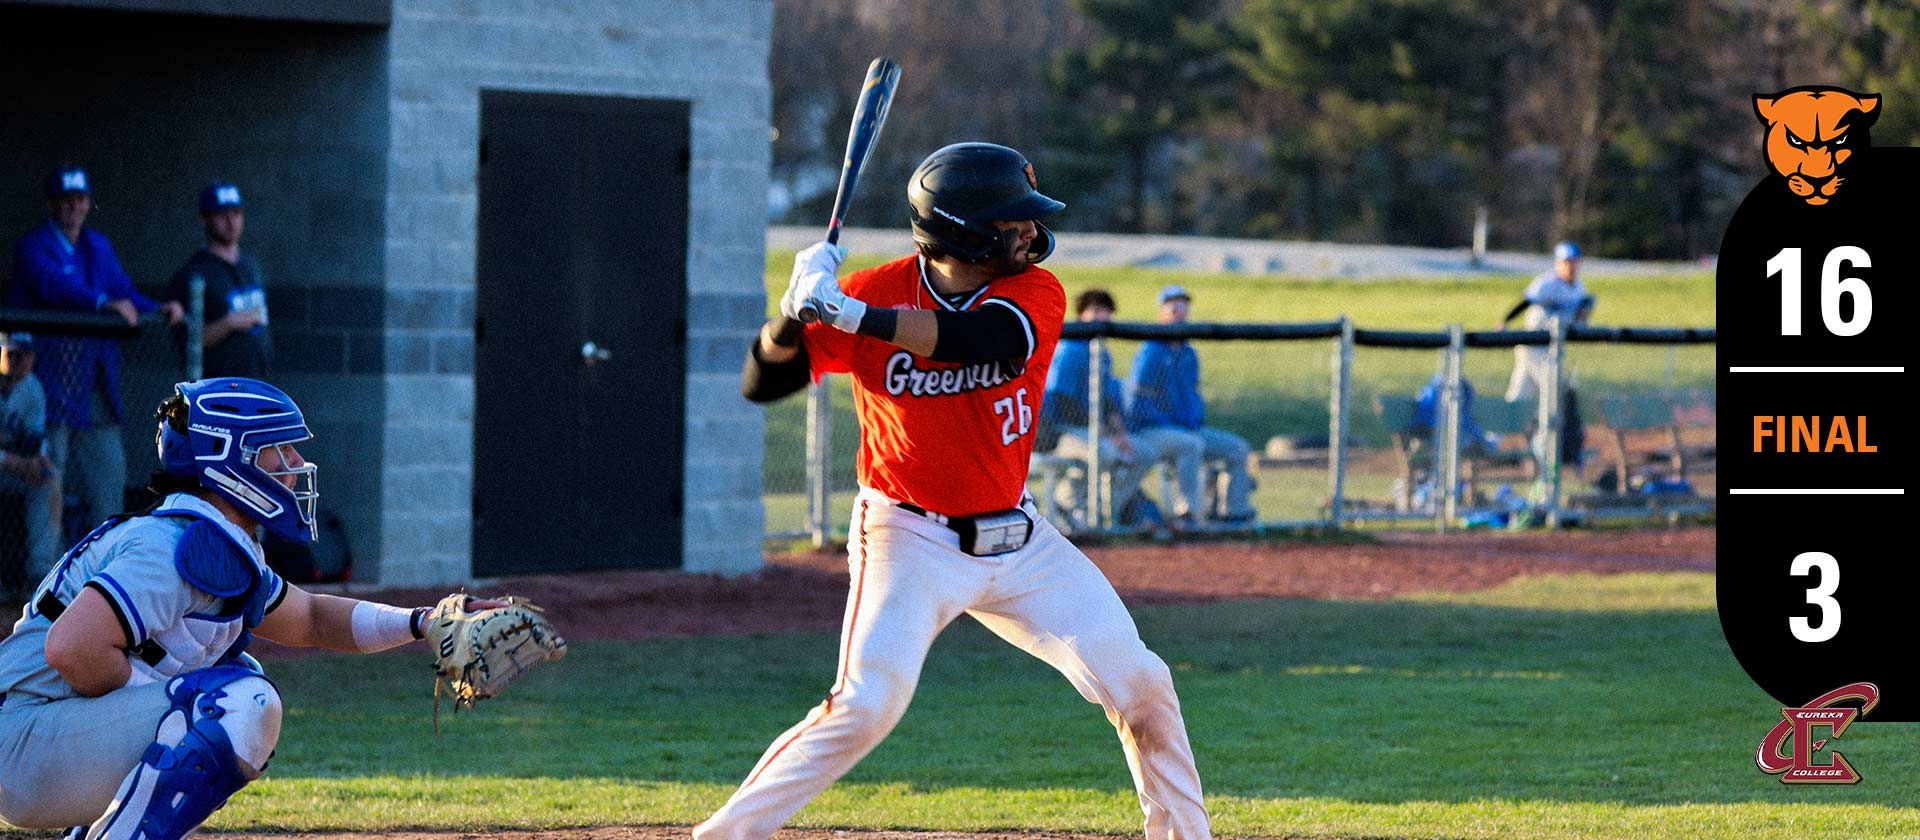 Baseball downs Eureka in both ends of Friday doubleheader